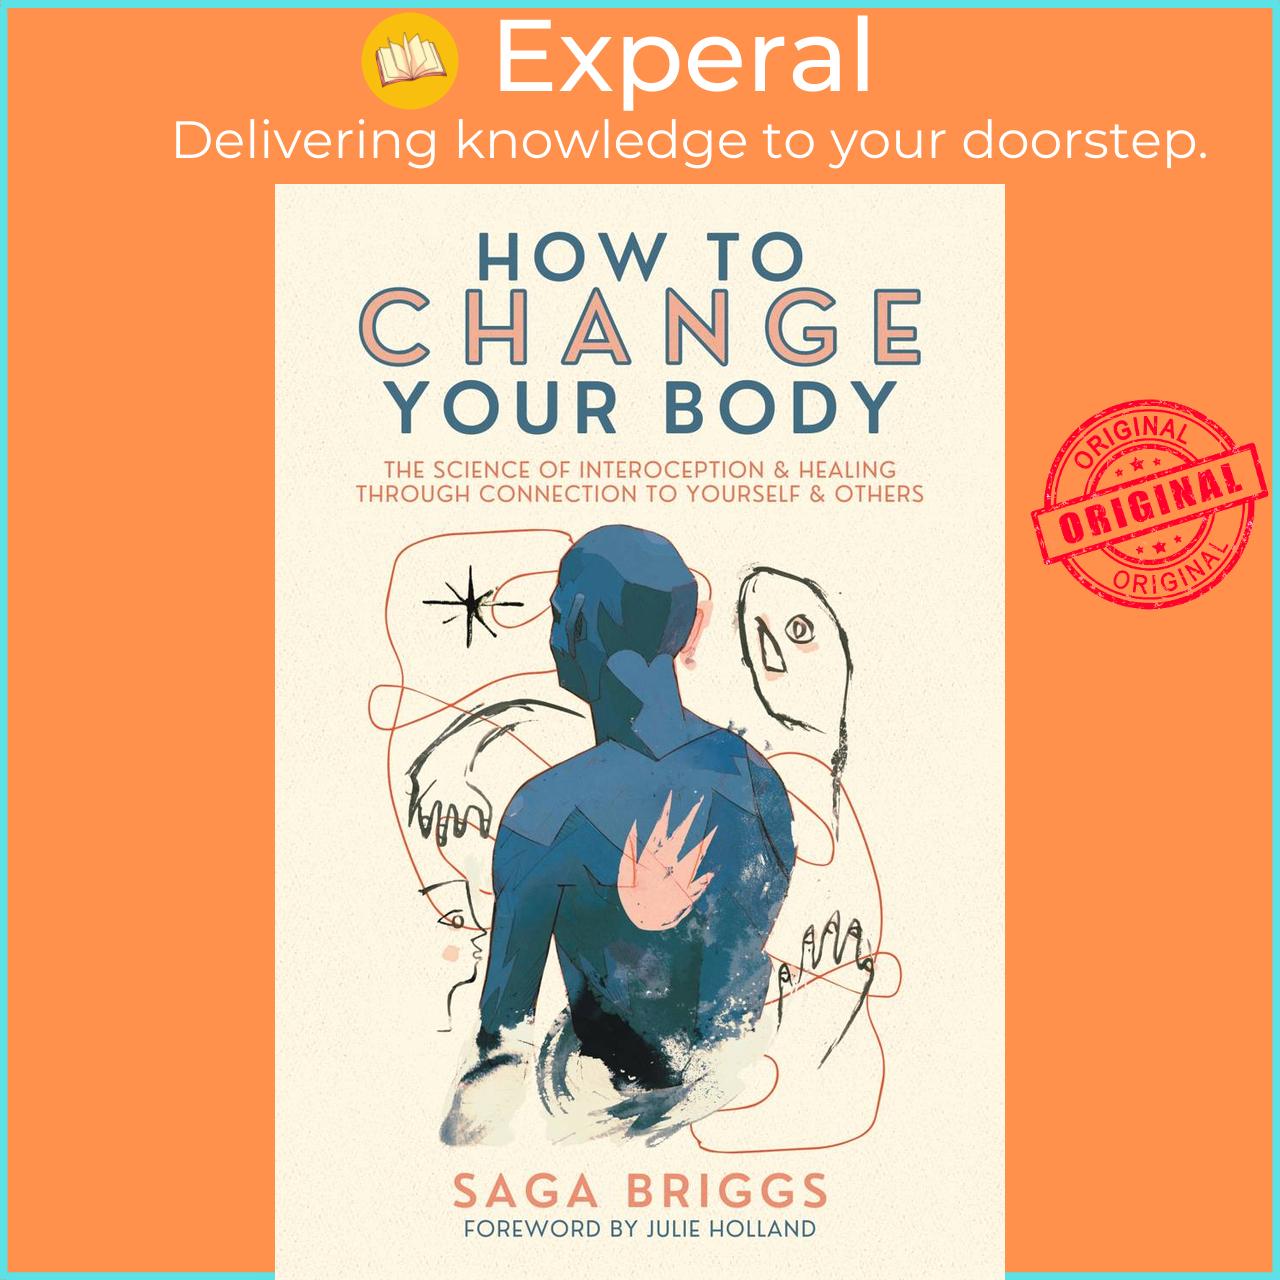 Sách - How to Change Your Body - What the Science of Interoception Can Teach Us About Healing by Saga Briggs (paperback)